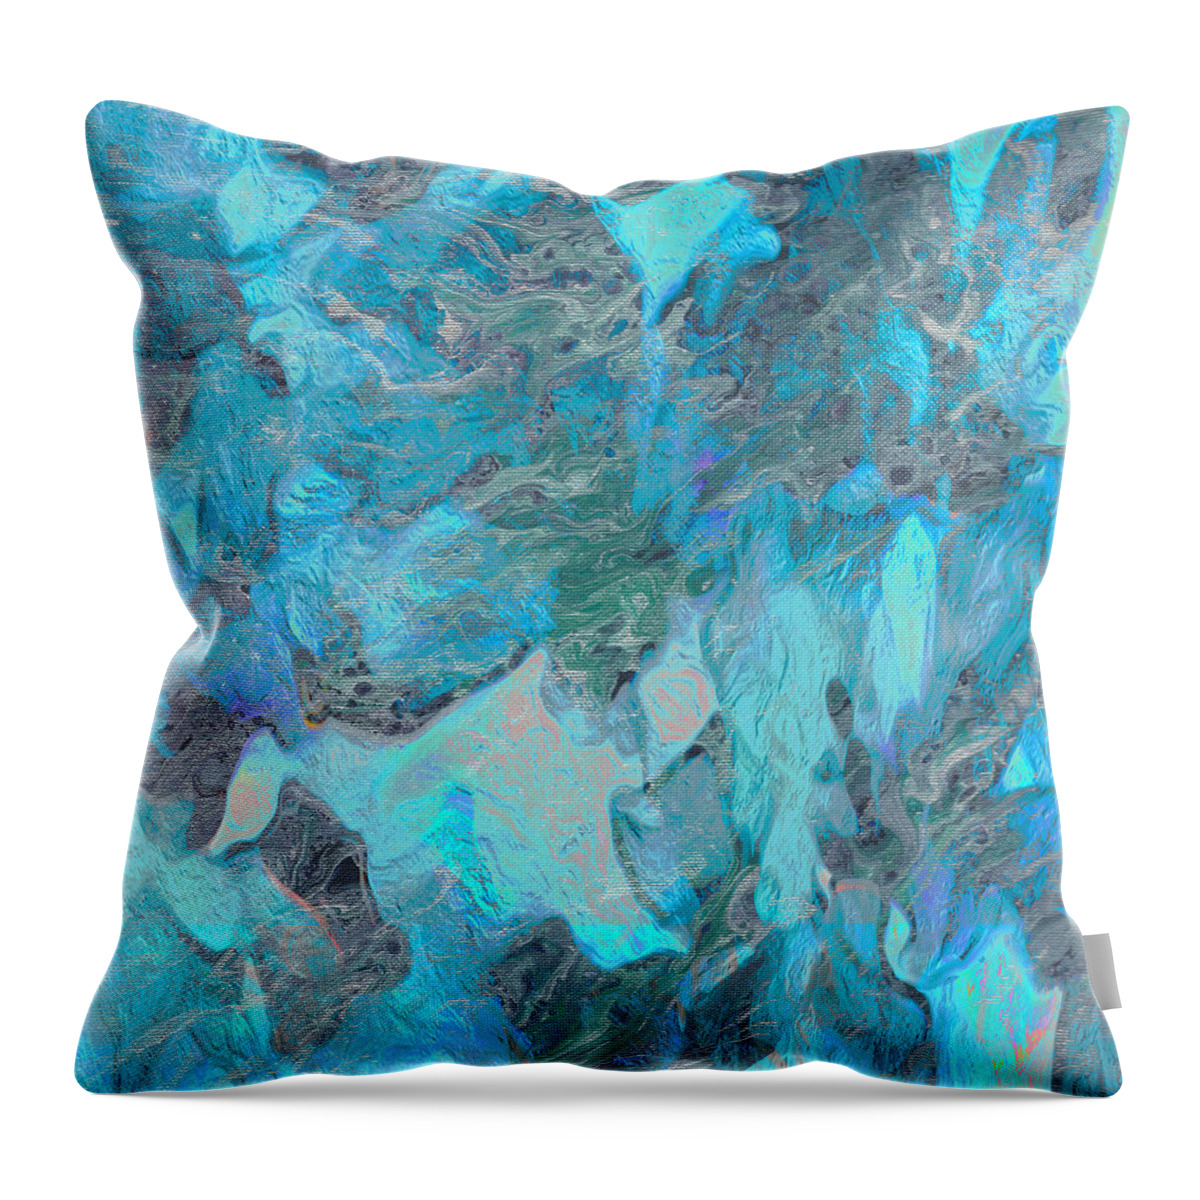 Abstract Throw Pillow featuring the mixed media Seascape by Stephanie Grant